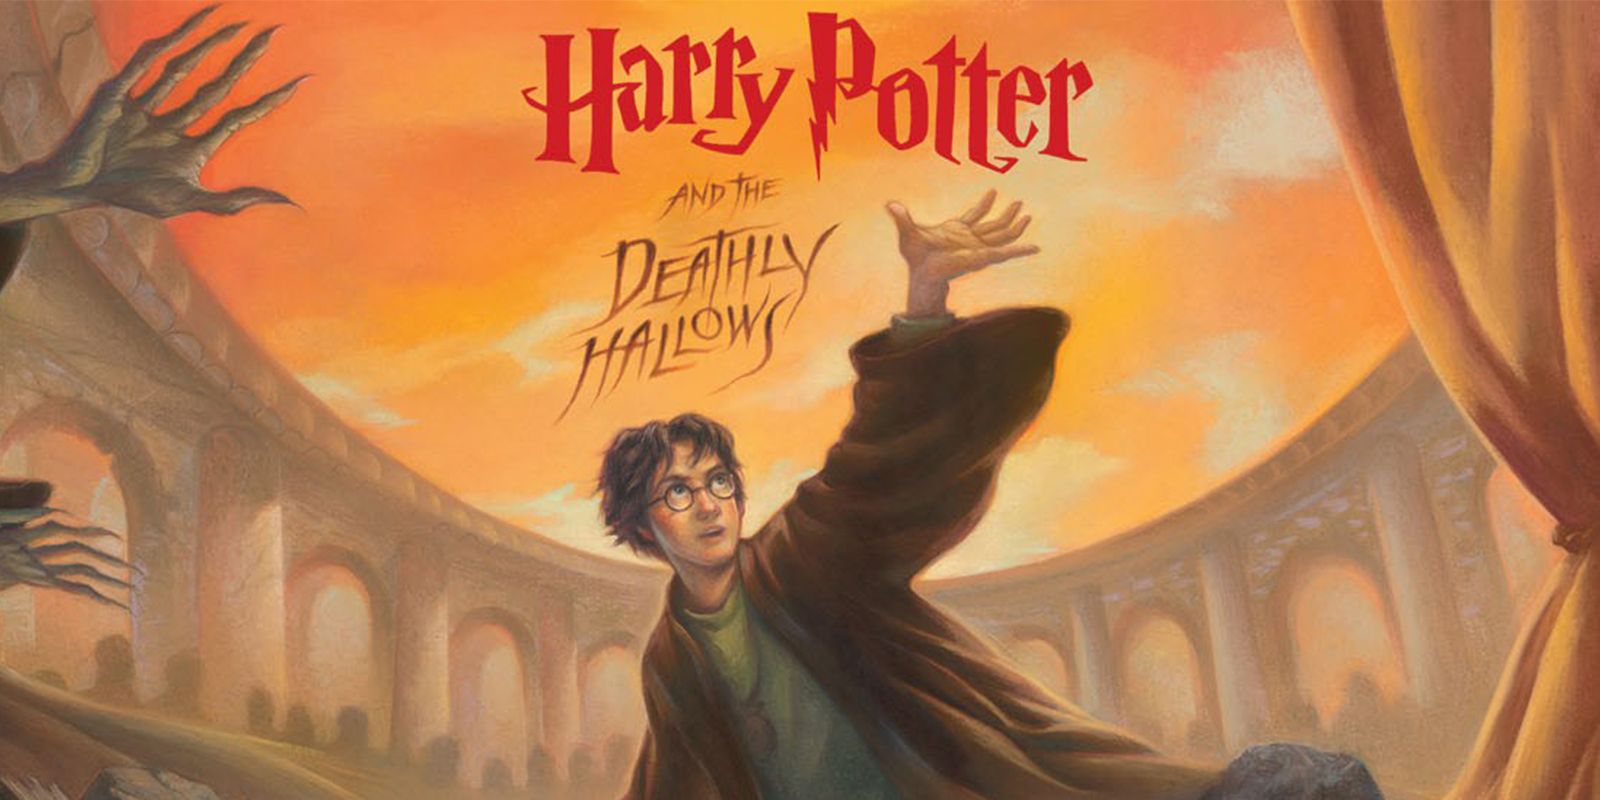 Harry Potter Deathly Hallows Book Cover